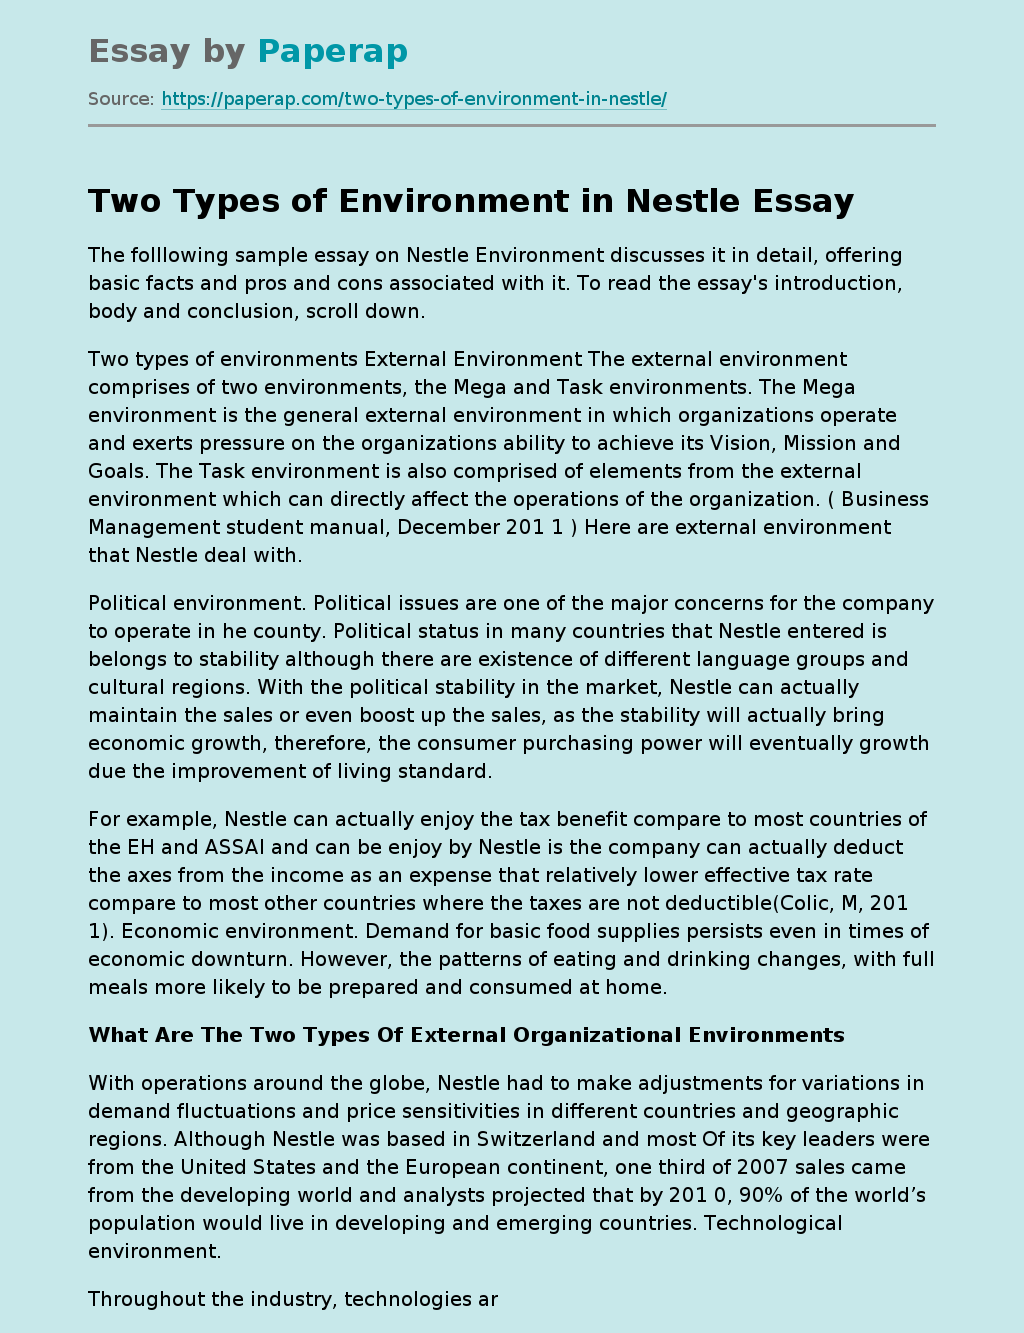 Two Types of Environment in Nestle